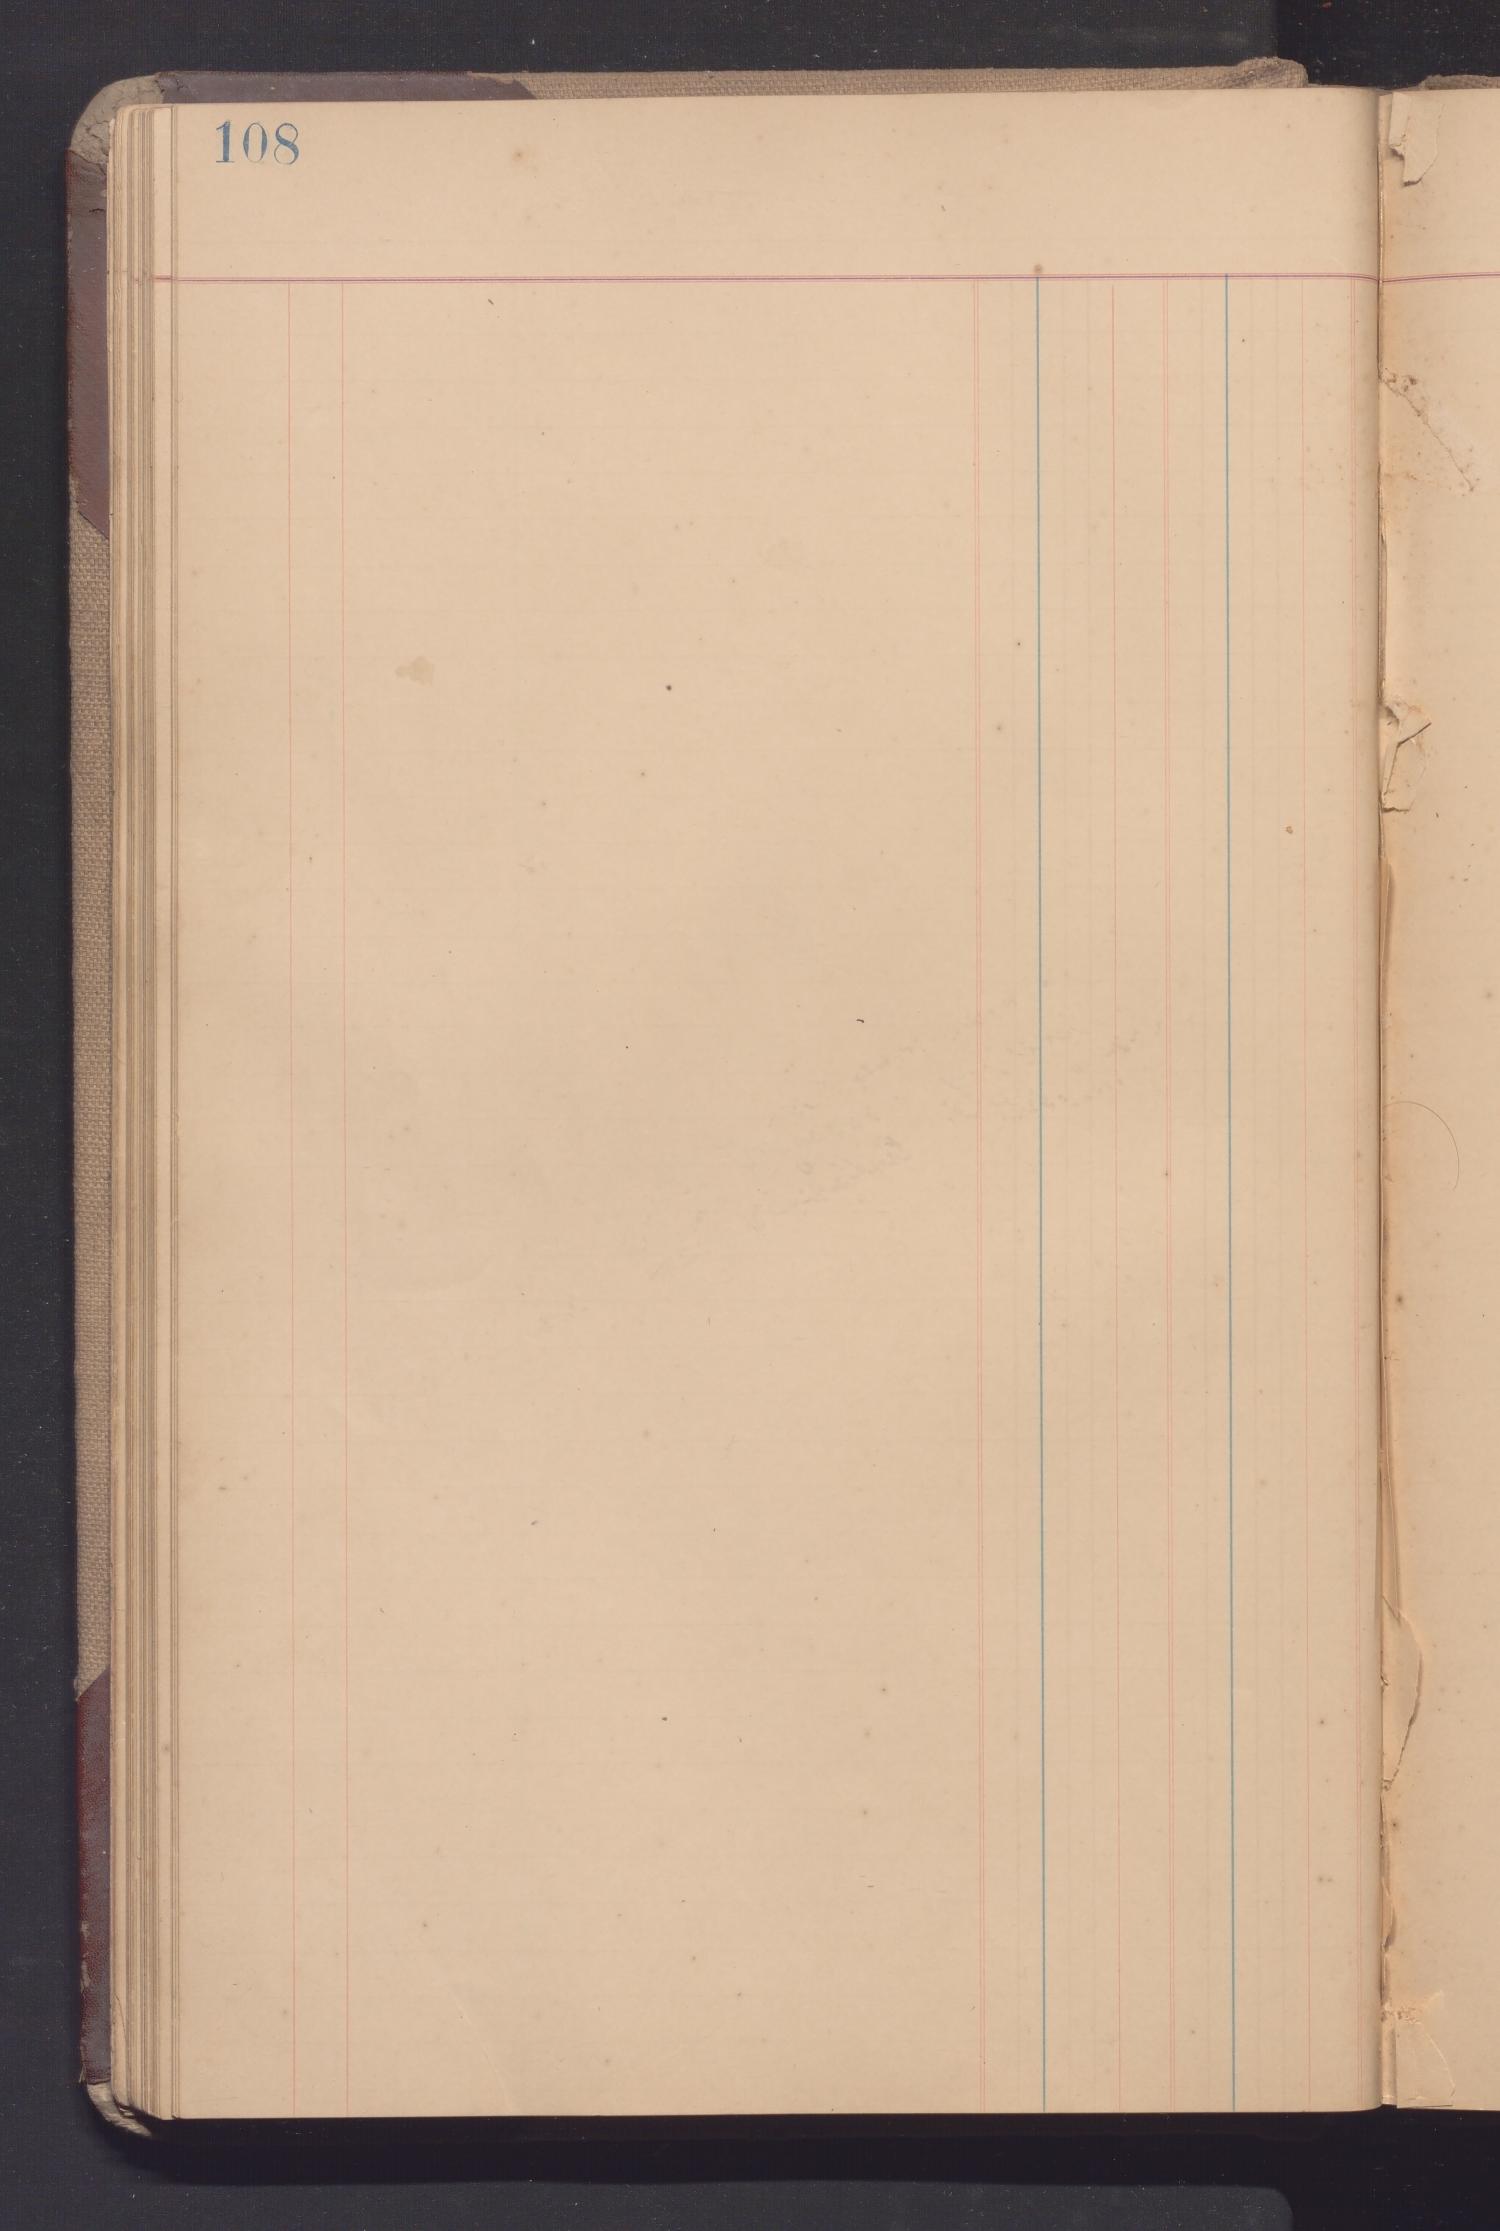 [O'Connor Brothers General Business Ledger: July 1899 - March 1939]
                                                
                                                    108
                                                